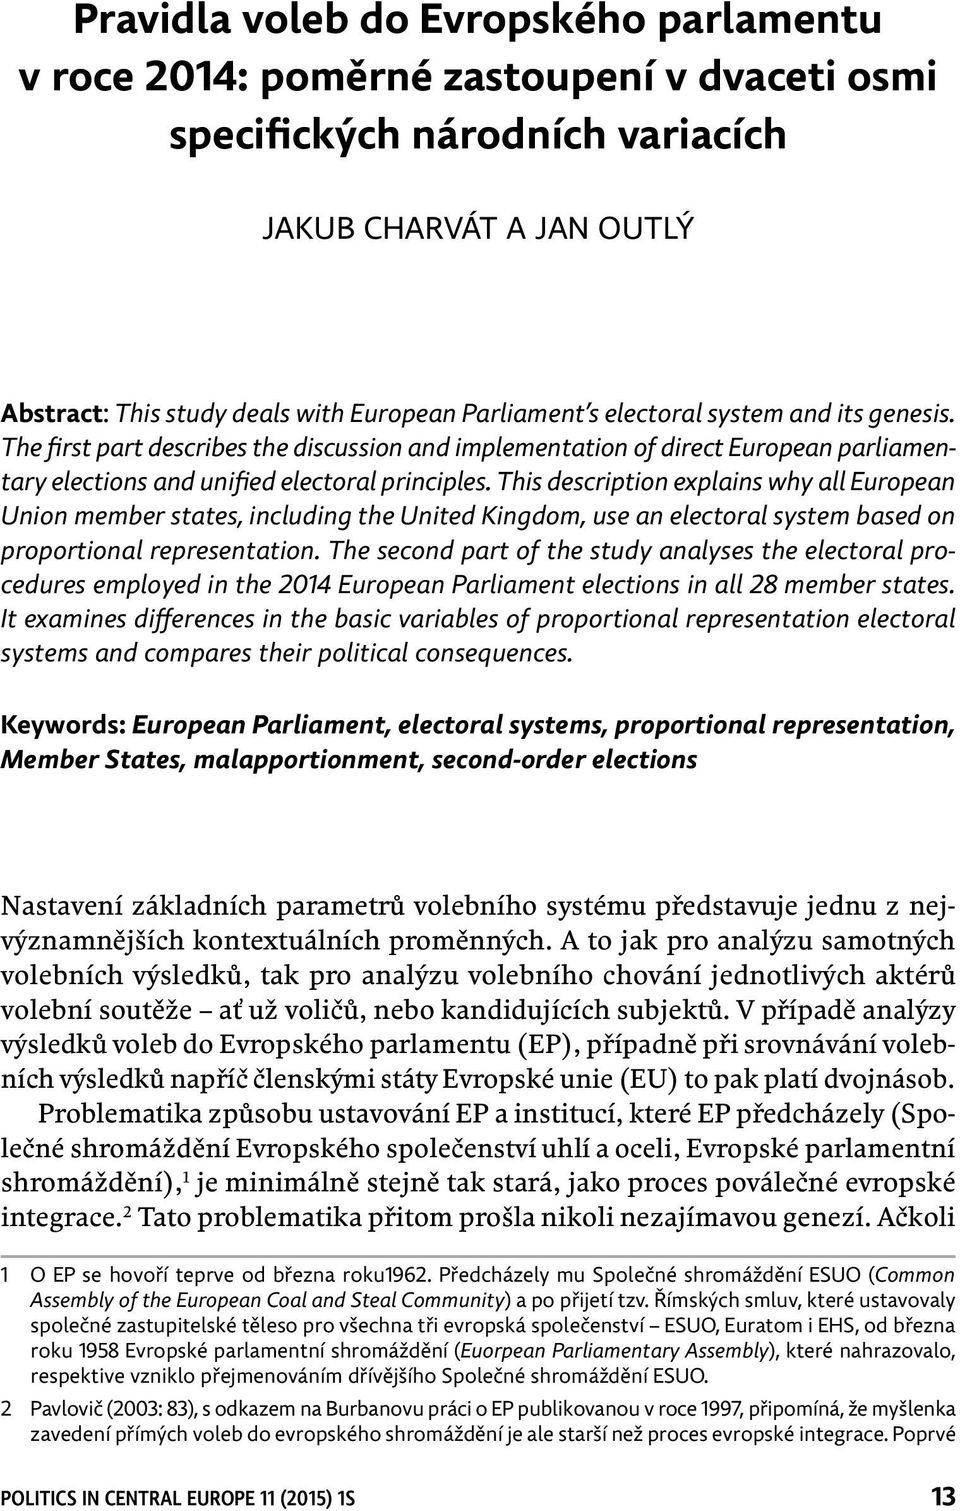 This description explains why all European Union member states, including the United Kingdom, use an electoral system based on proportional representation.